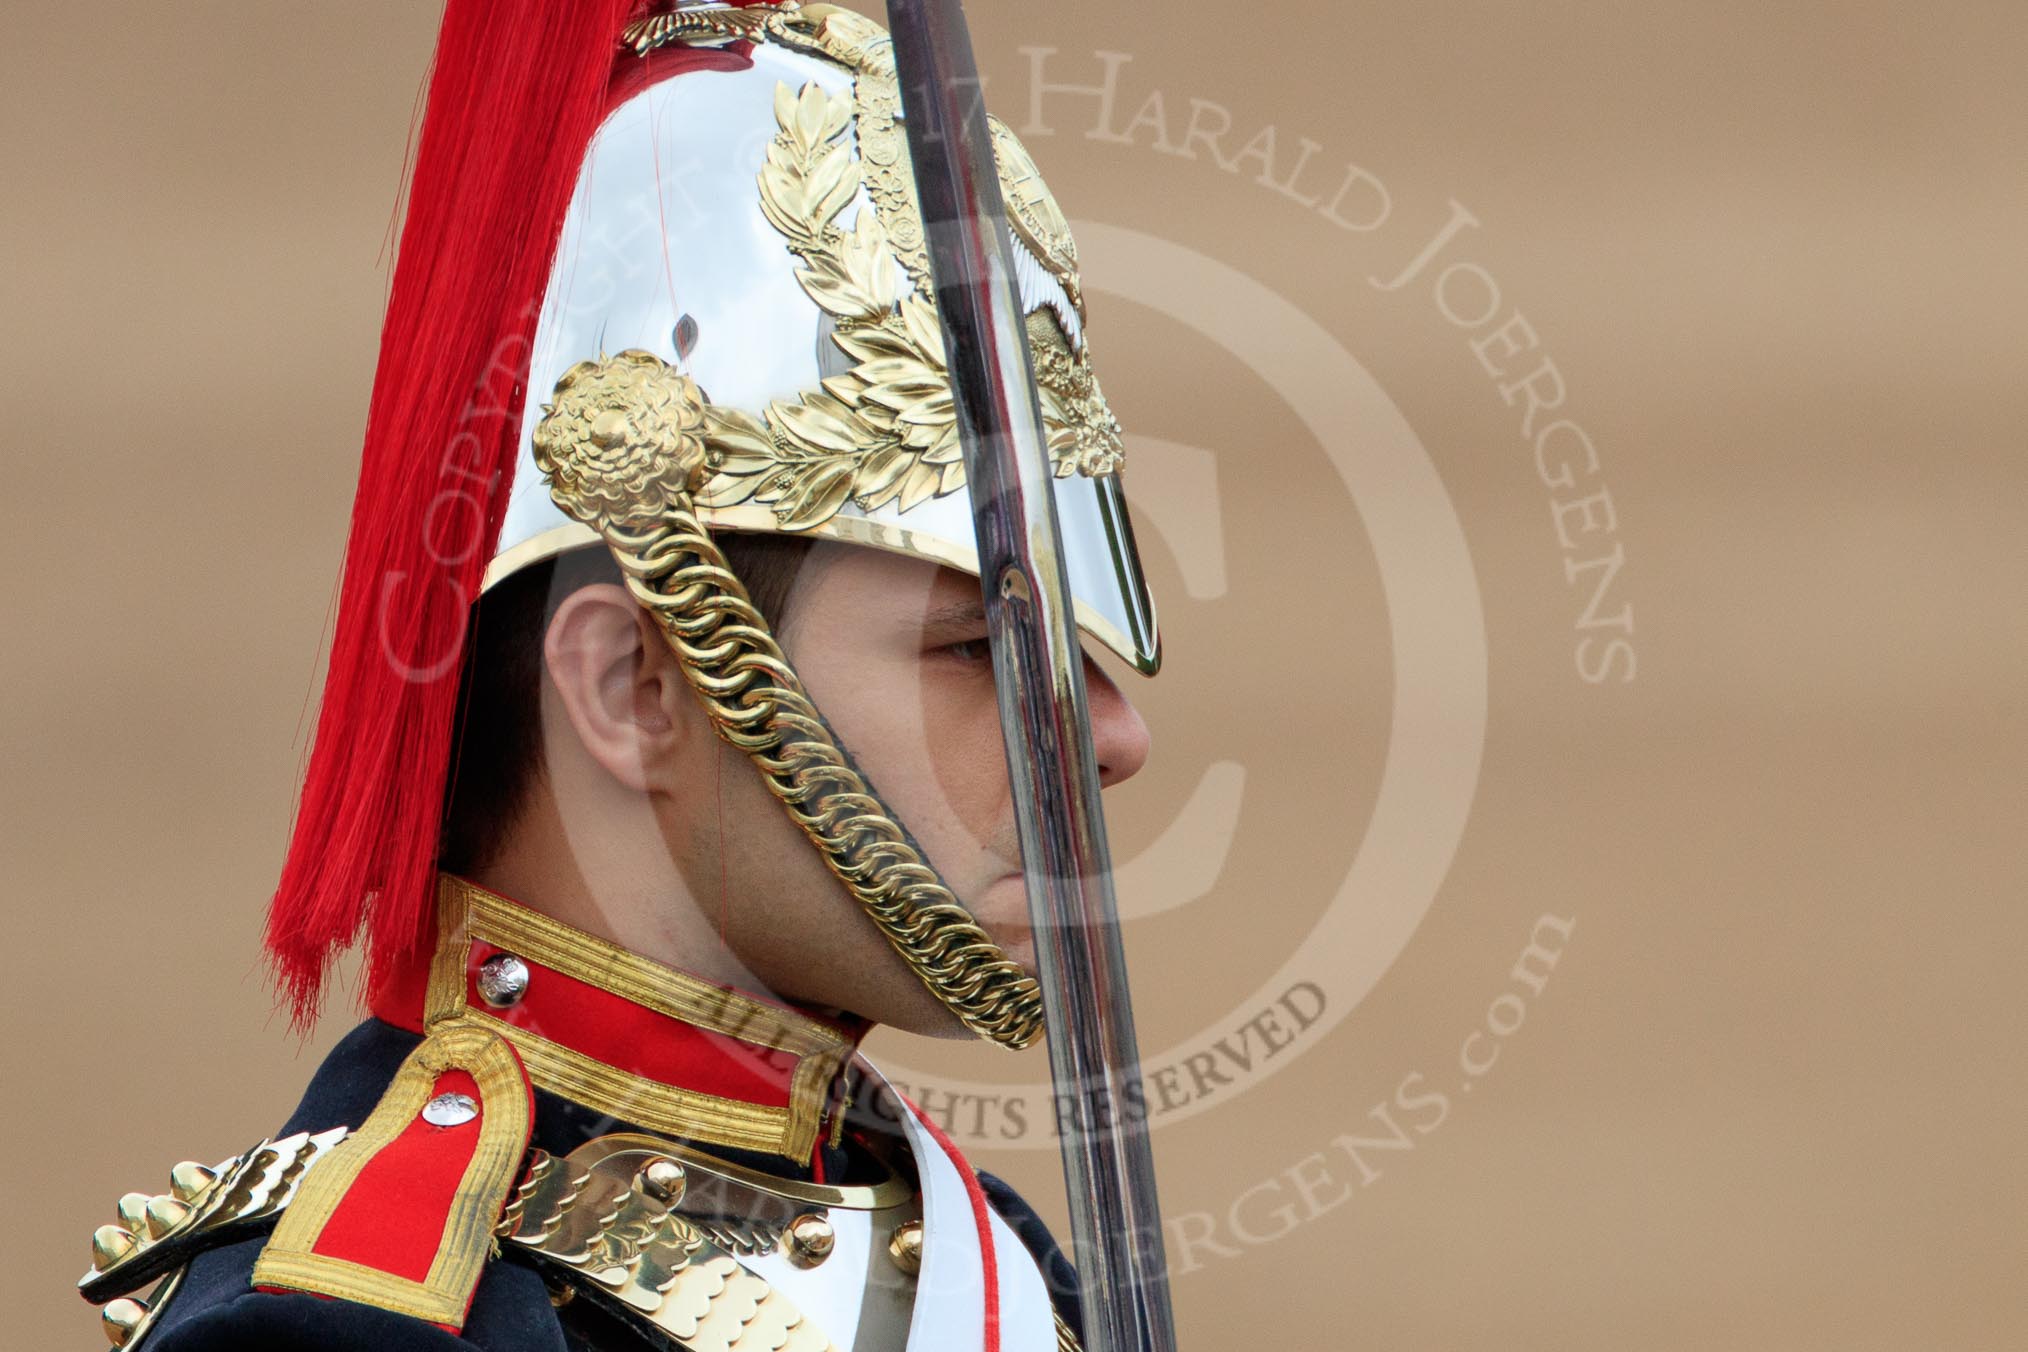 during The Colonel's Review {iptcyear4} (final rehearsal for Trooping the Colour, The Queen's Birthday Parade)  at Horse Guards Parade, Westminster, London, 2 June 2018, 10:58.